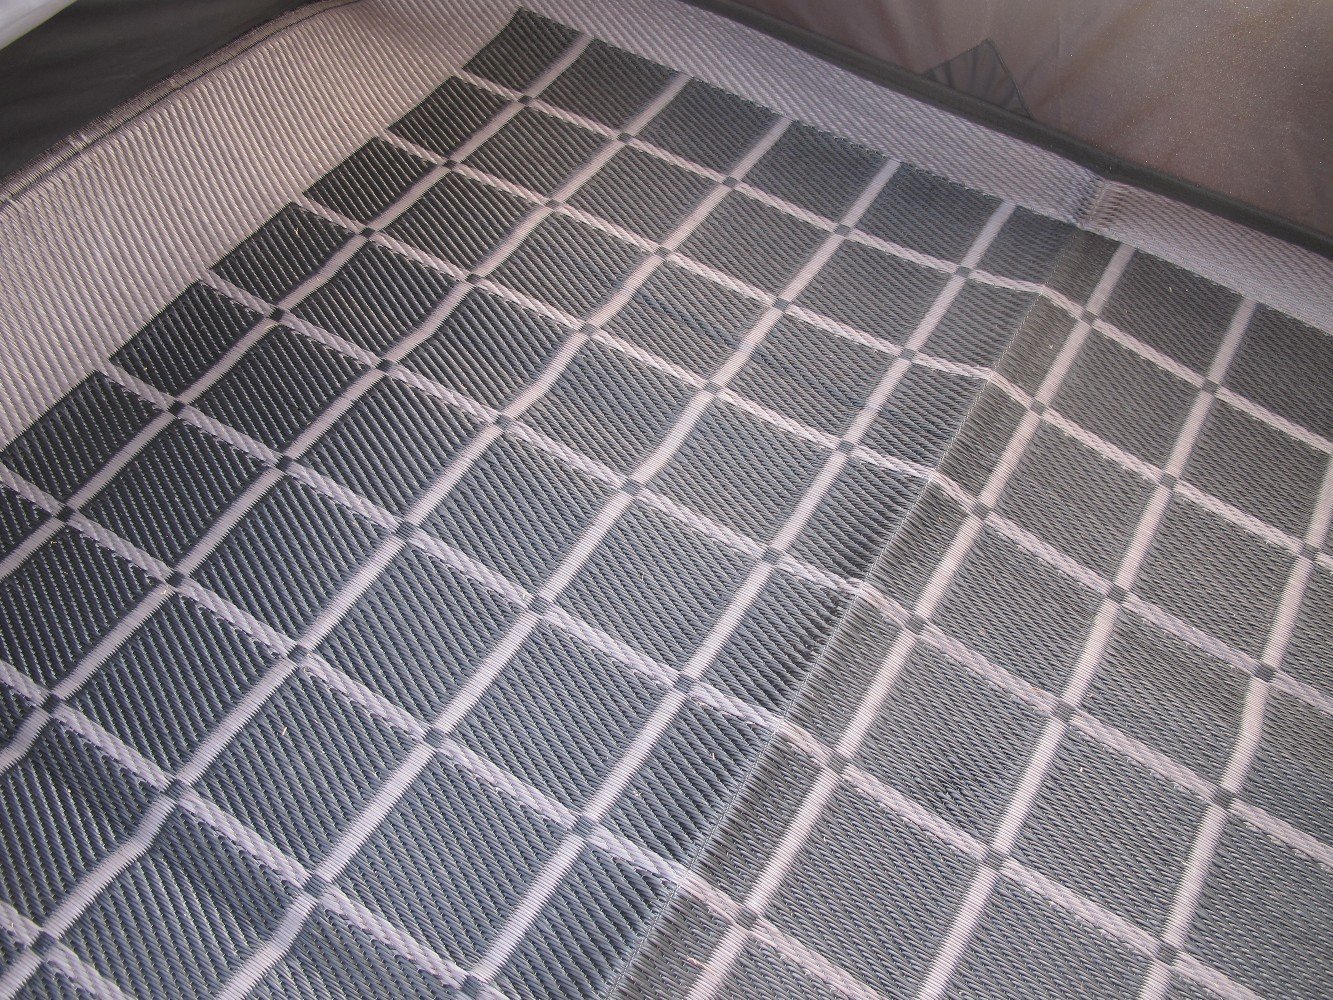 Review of MP Brands Essentials Weatherproof Awning Carpet